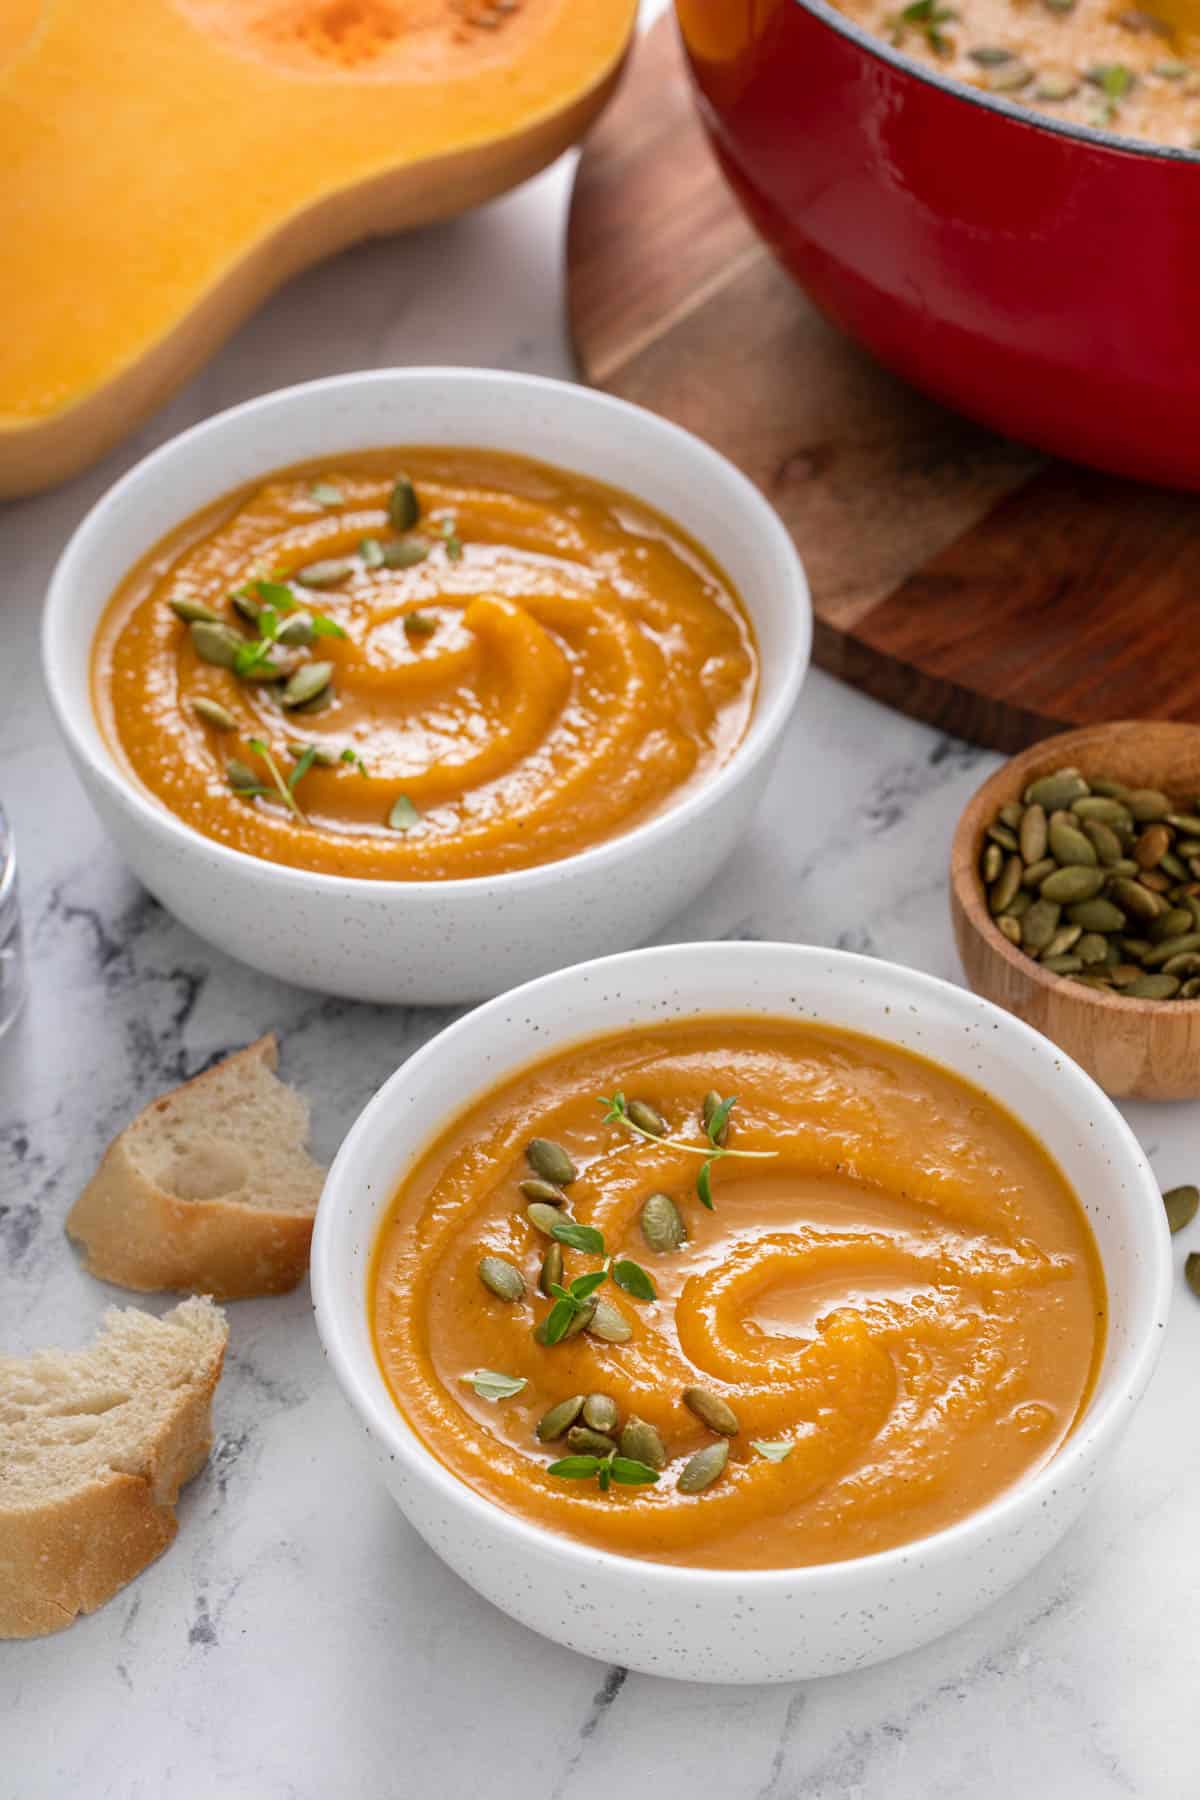 two bowls of butternut squash soup next to a pot of the soup and a bowl of pumpkin seeds